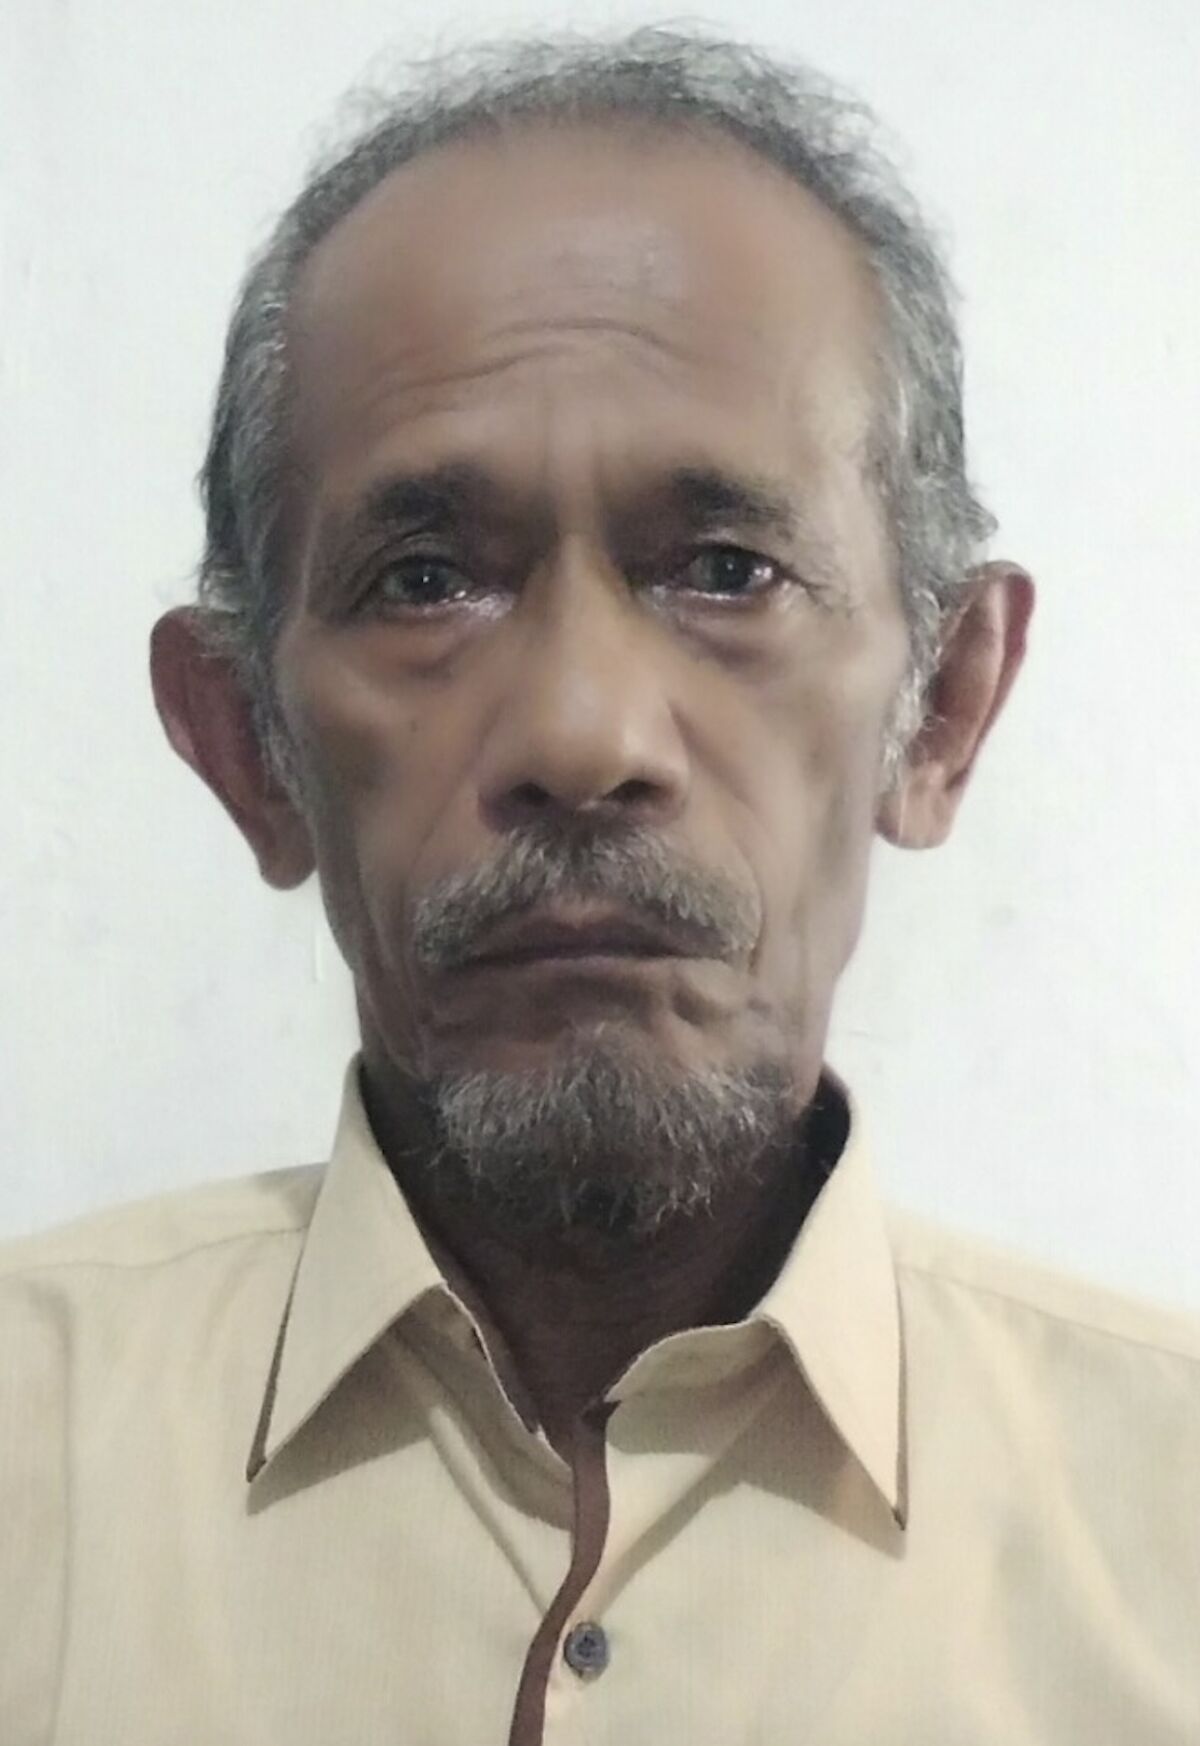 Associated Press journalist Ali Kotarumalos sits for a portrait in Jakarta, Indonesia, in 2018. Kotarumalos, who worked as a newsperson at the Jakarta bureau of the Associated Press for more than three decades, passed away on Wednesday, September 9, 2020 after battling can cer. He was 68. (AP Photo/Achmad Ibrahim)